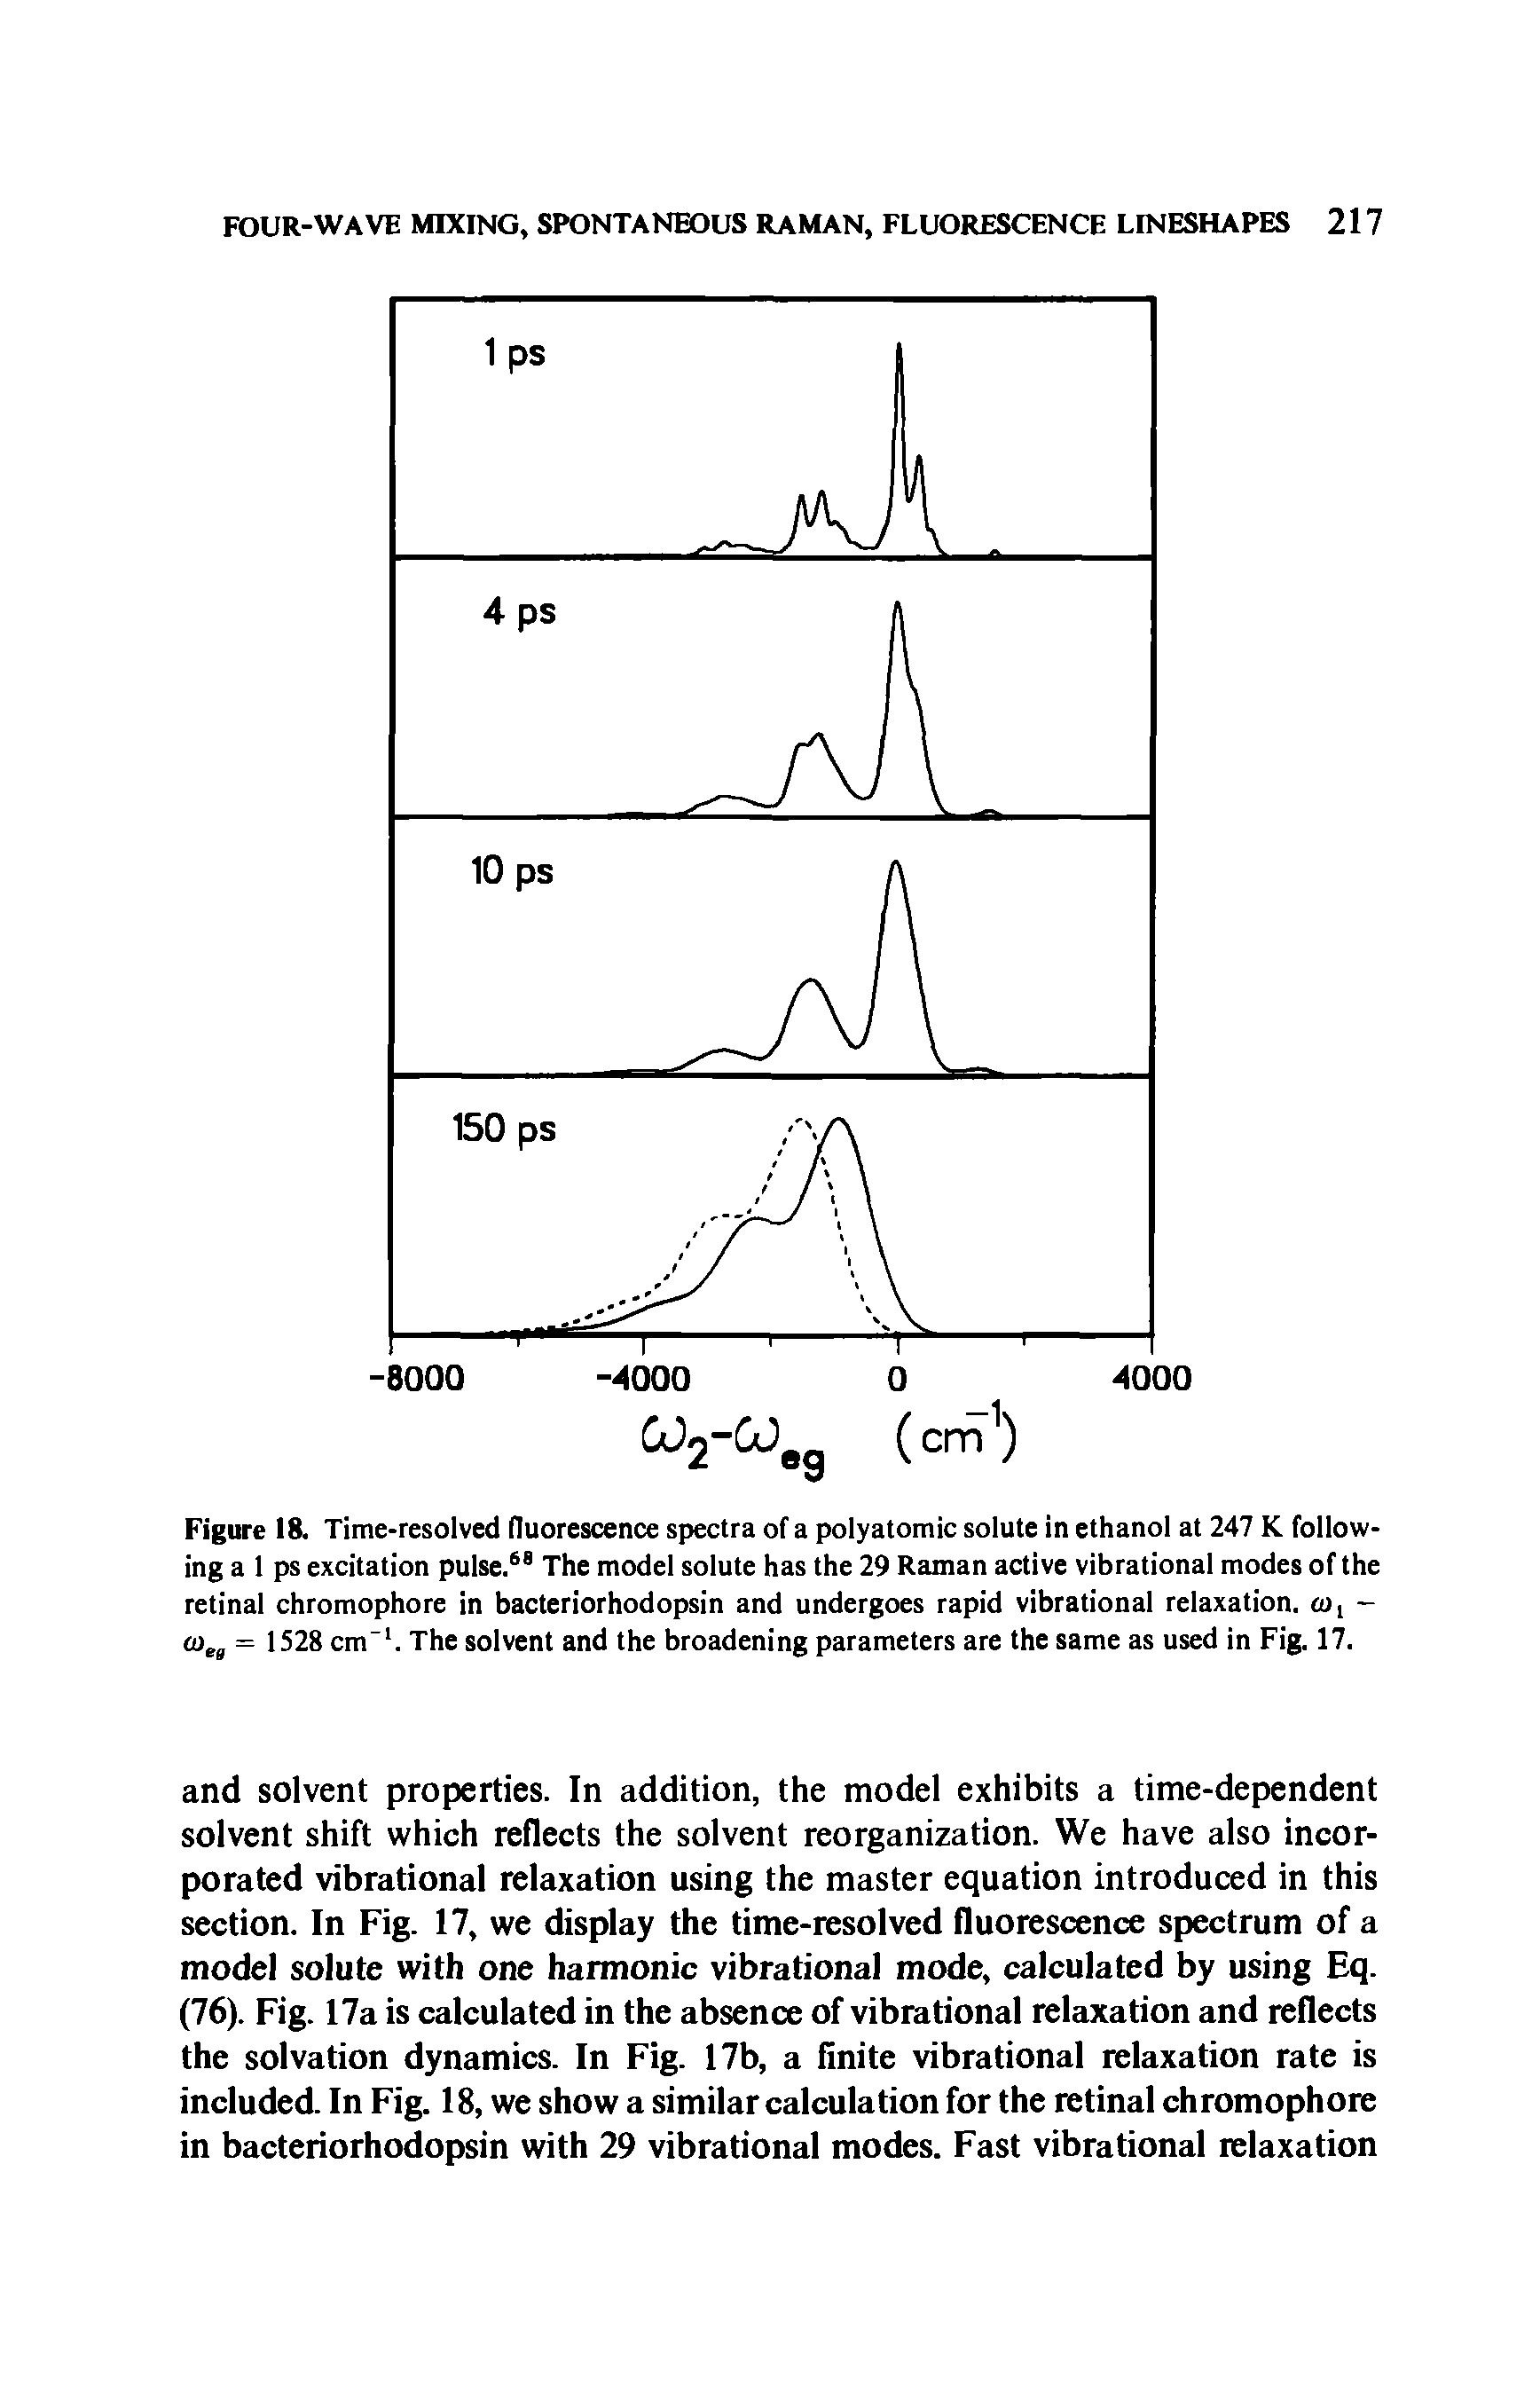 Figure 18. Time-resolved fluorescence spectra of a polyatomic solute in ethanol at 247 K following a 1 ps excitation pulse.68 The model solute has the 29 Raman active vibrational modes of the retinal chromophore in bacteriorhodopsin and undergoes rapid vibrational relaxation, co, -a>ei = 1528 cm-1. The solvent and the broadening parameters are the same as used in Fig. 17.